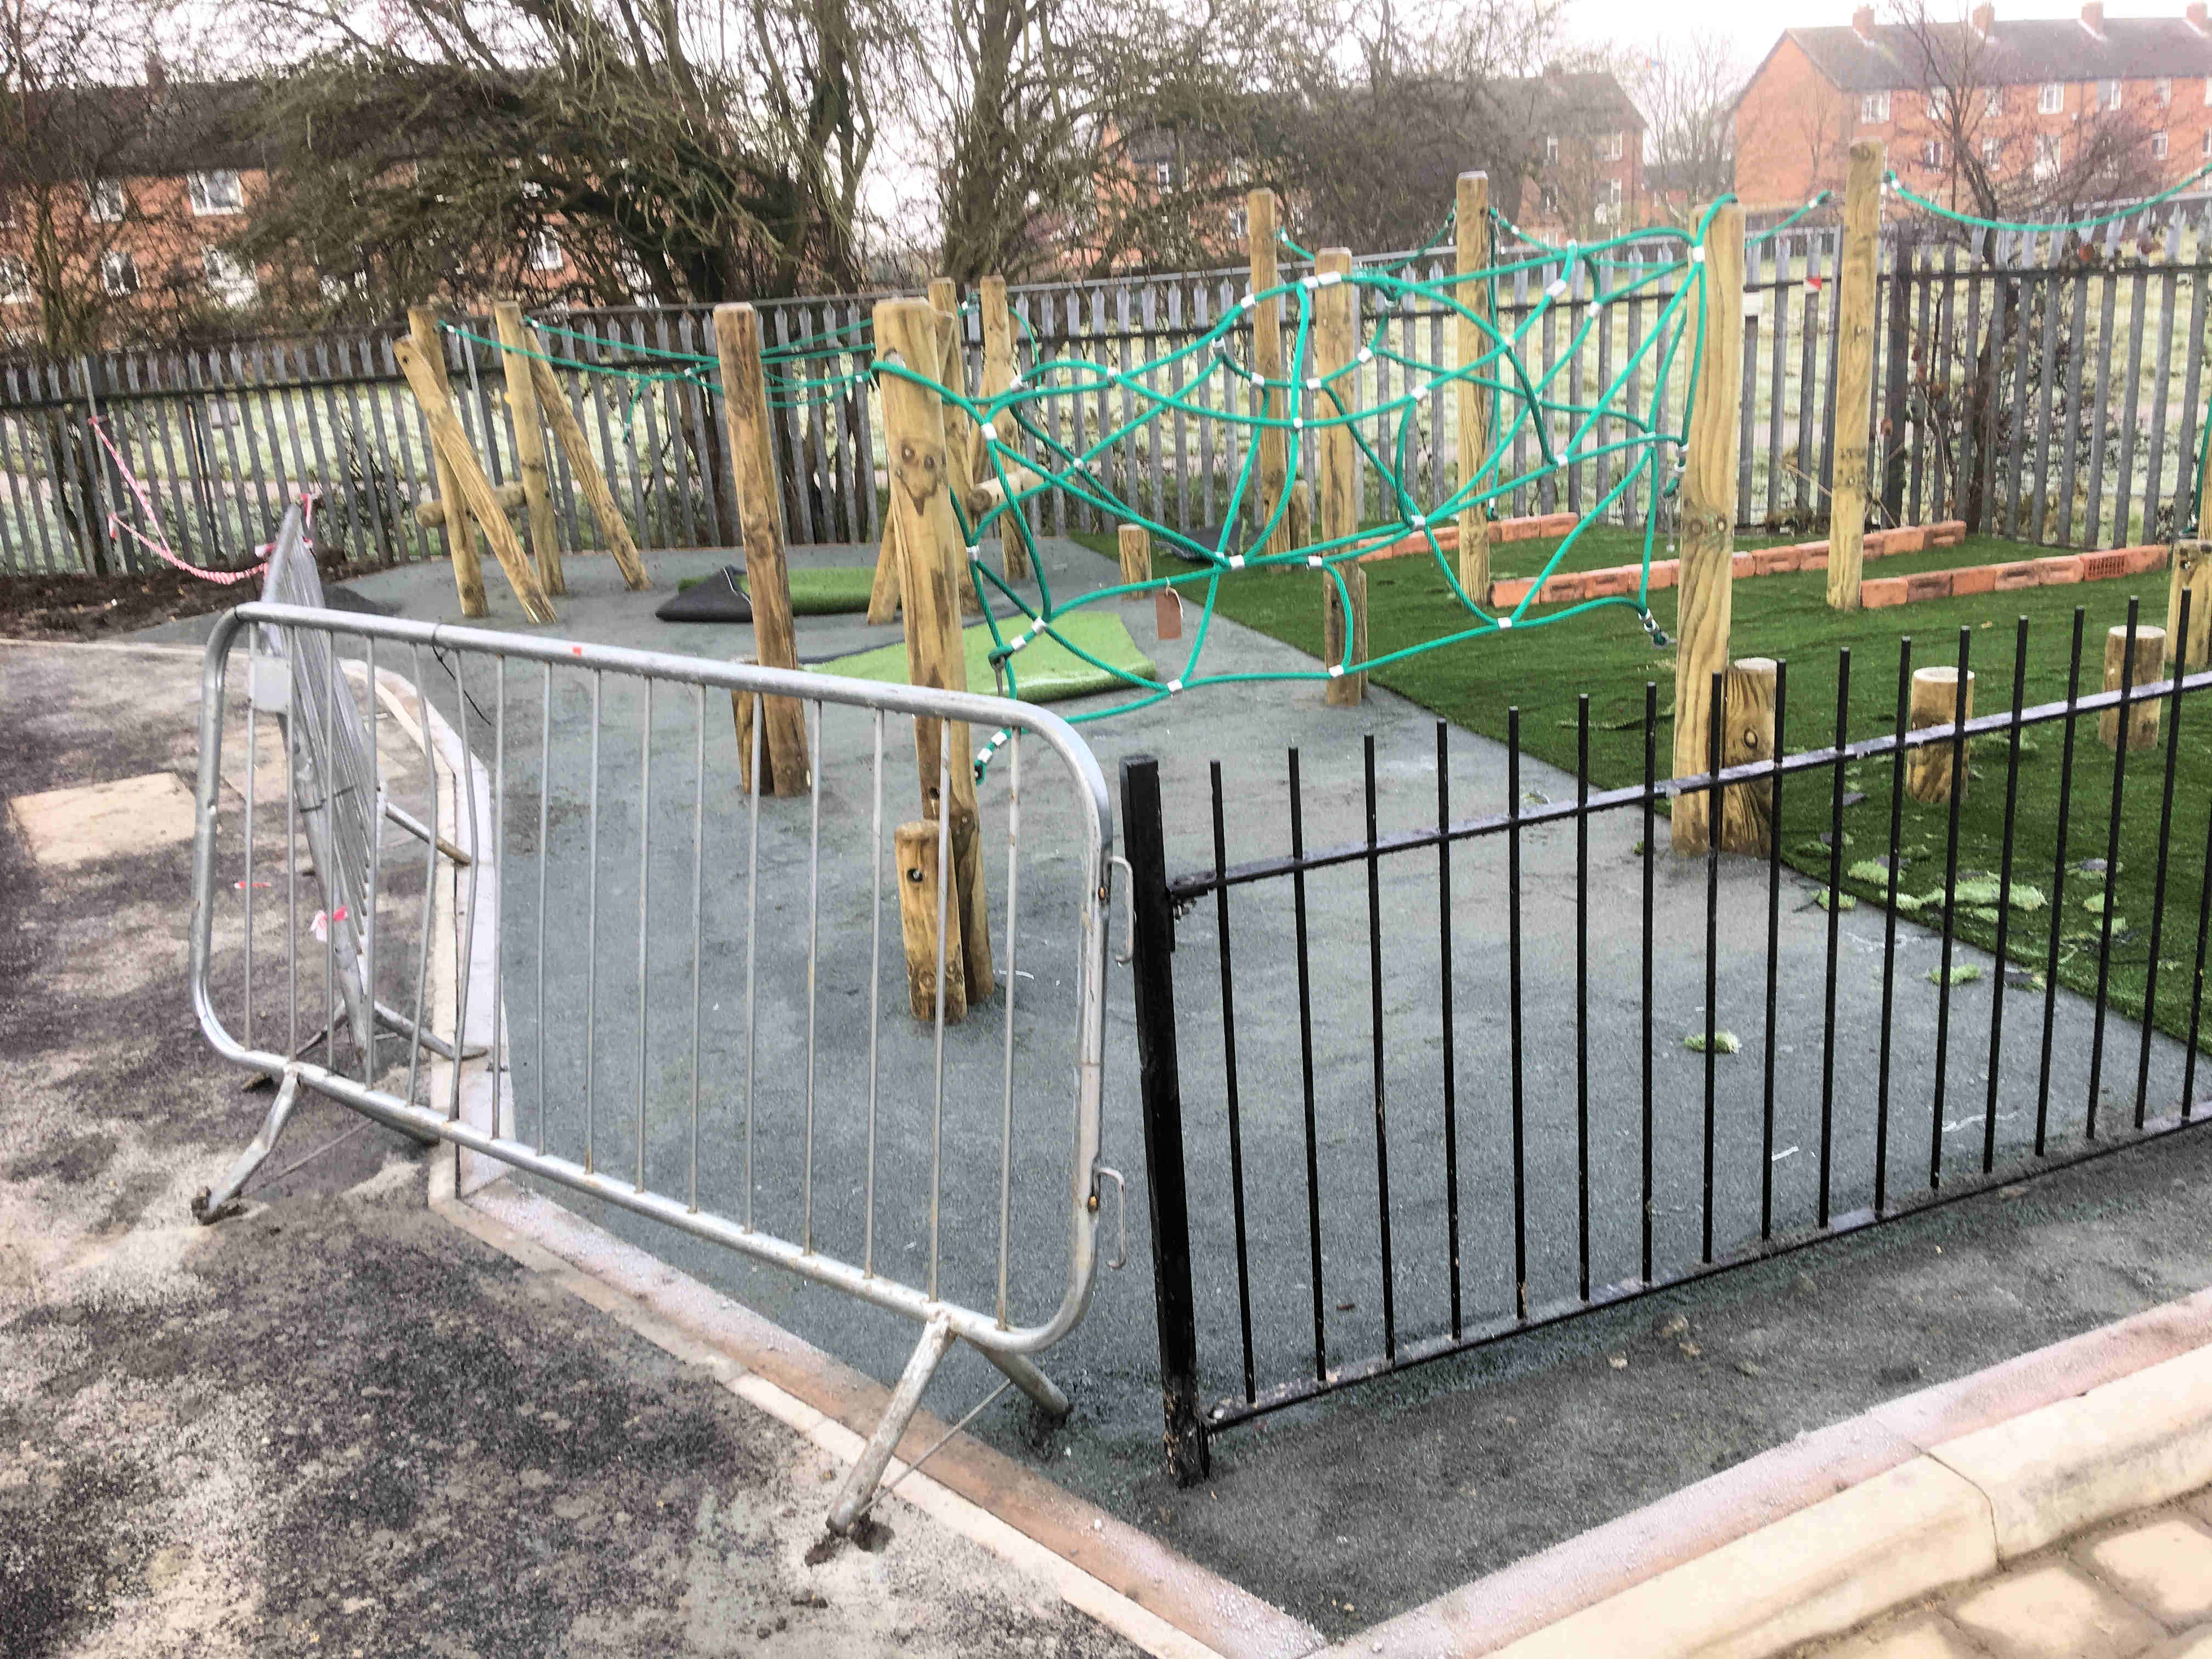 On Hob Stones itself the new play area has not been completed.